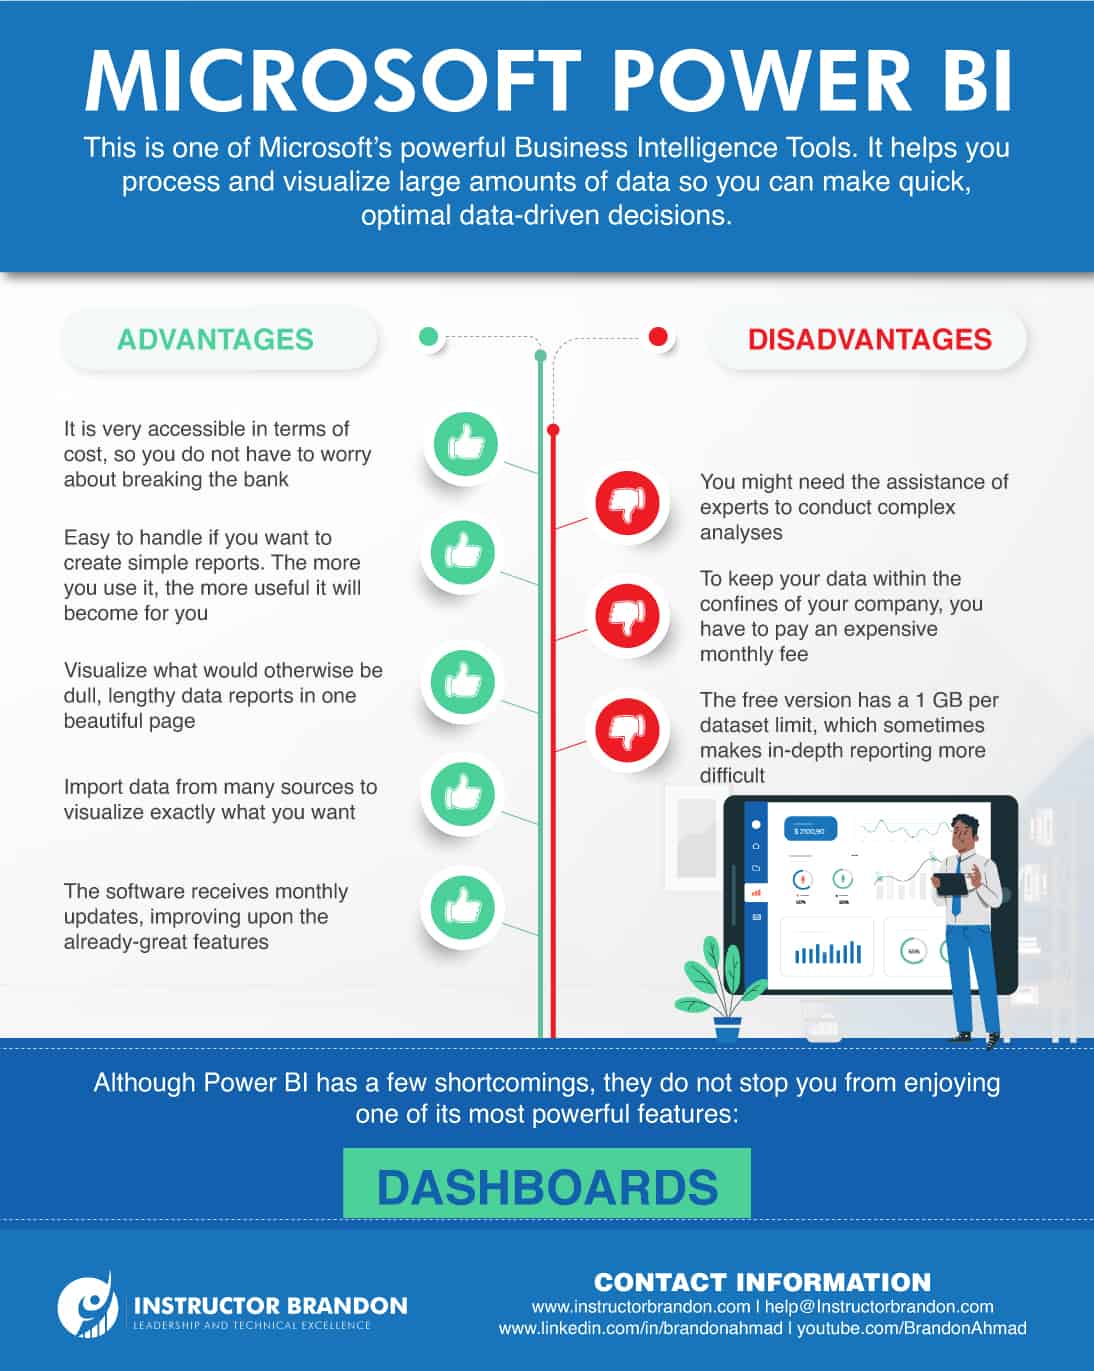 Infographic Showcasing the Advantages and Disadvantages of Microsoft Power BI